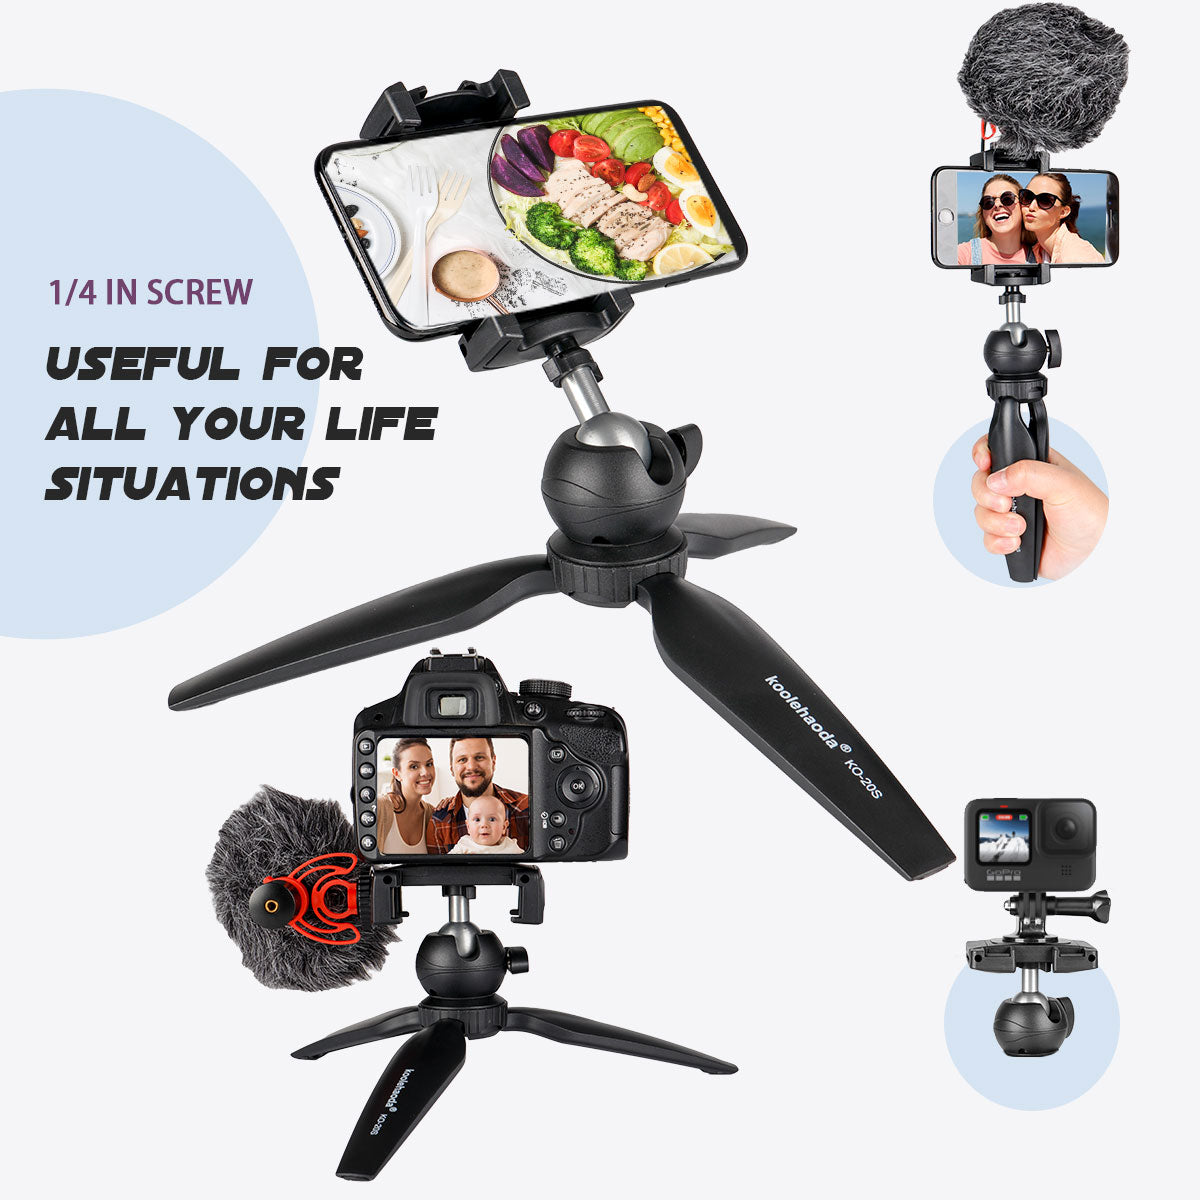 Koolehaoda Mini Tripod Stand with Universal Clip, Small Handheld Grip Tripod Desktop Tabletop Tripod Stand for iPhone/Sports Camera/Compact DLSR/Webcam/Projector - KQ-20S